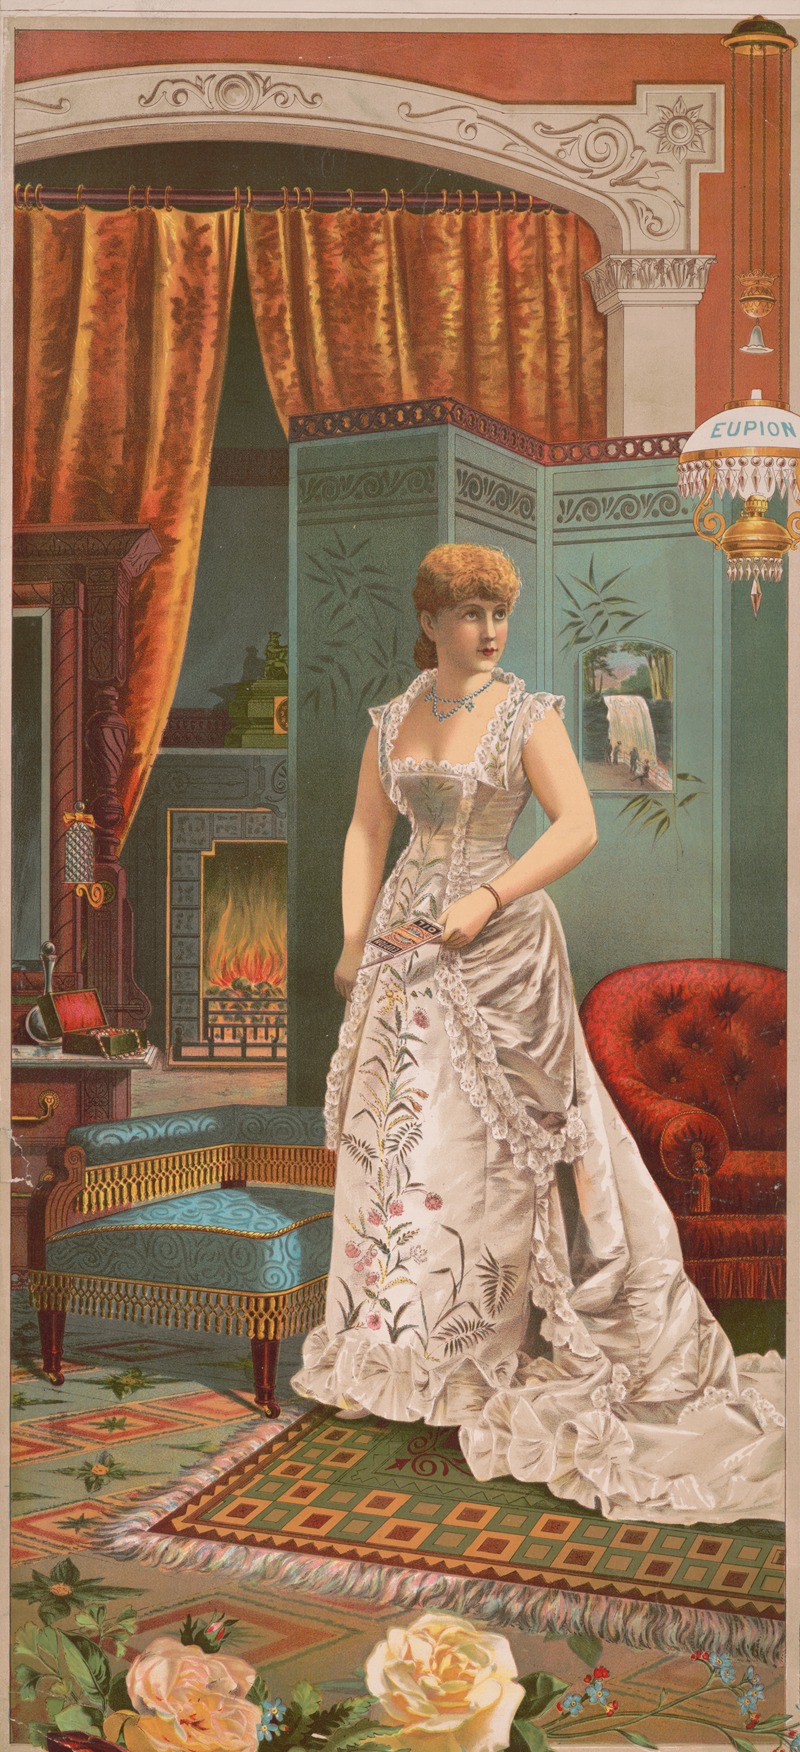 Eupion Oil - Woman in white dress standing holding a Eupion Oil brochure with fireplace and oil lamp in background